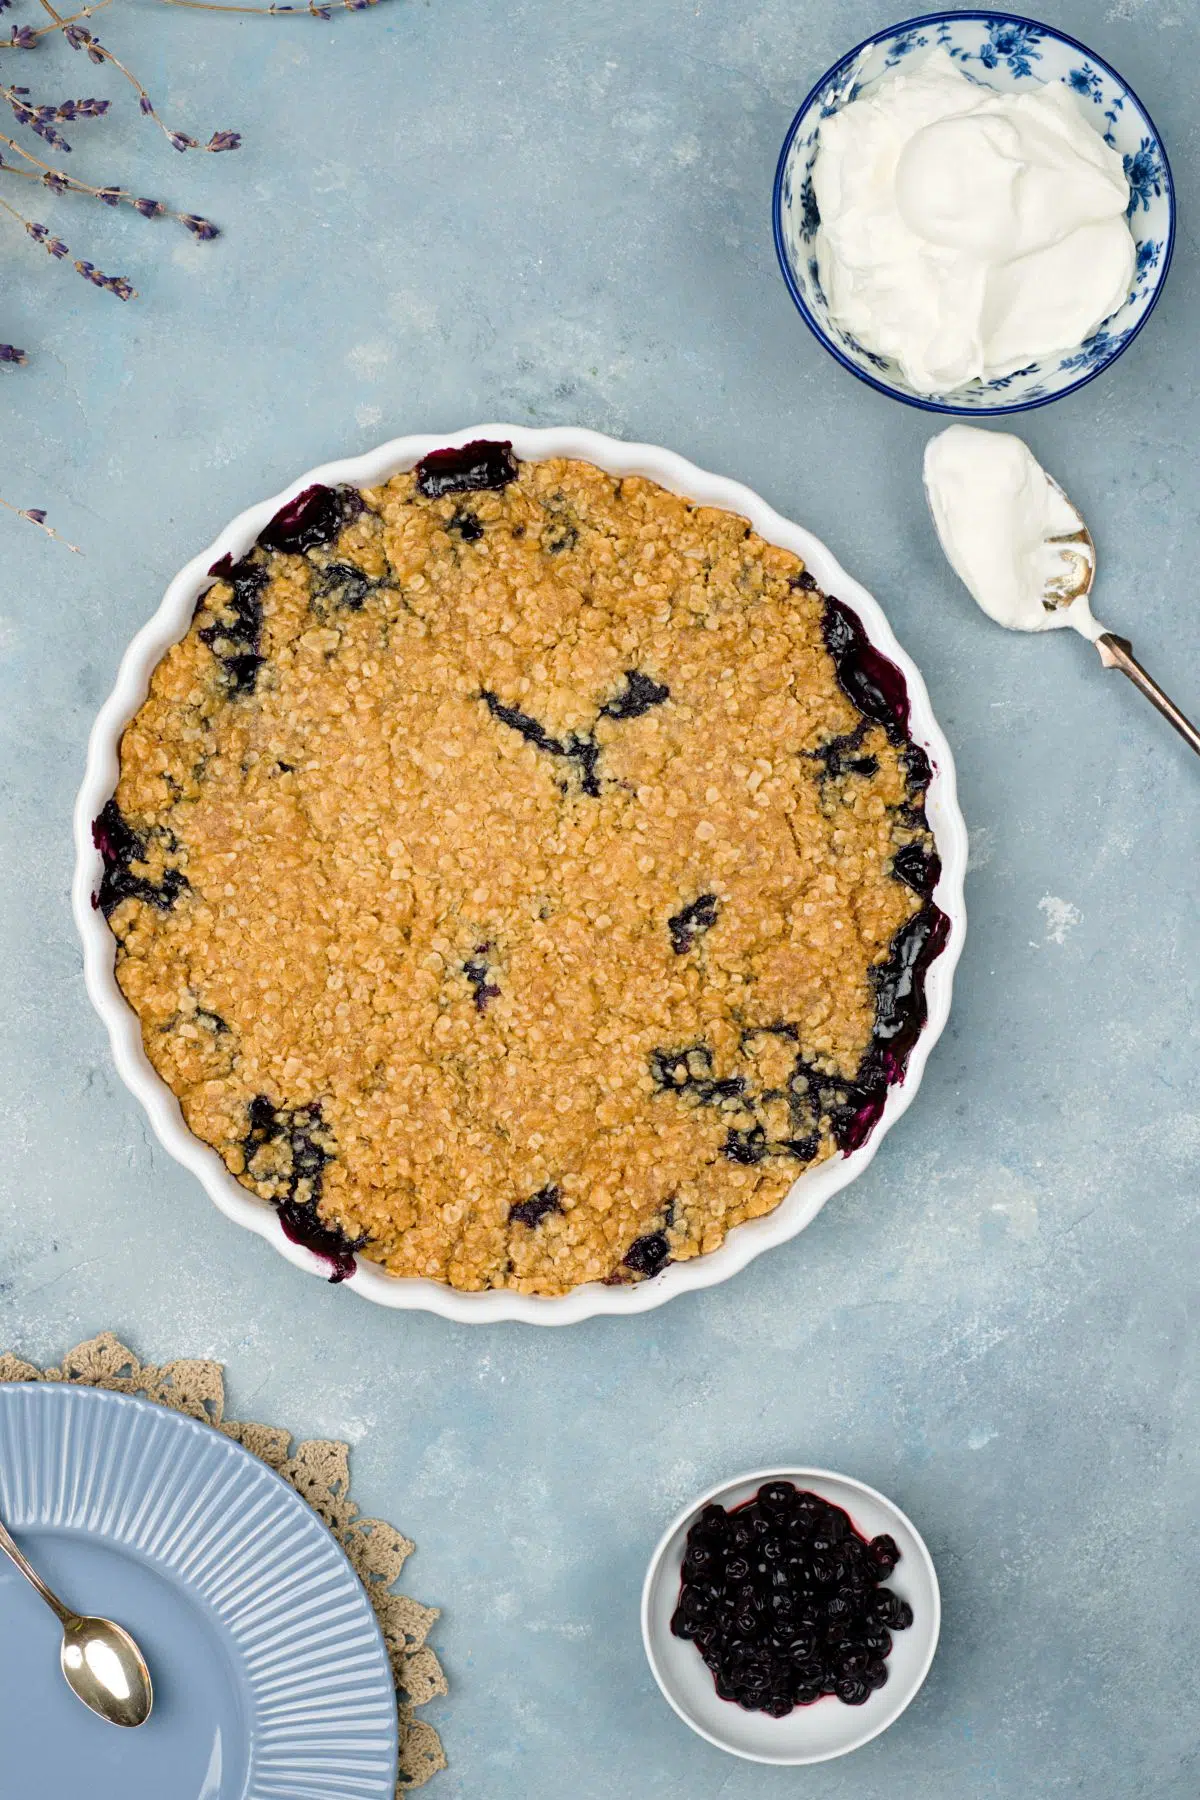 Blueberry crumble pie in white pan and whipped cream bowl.